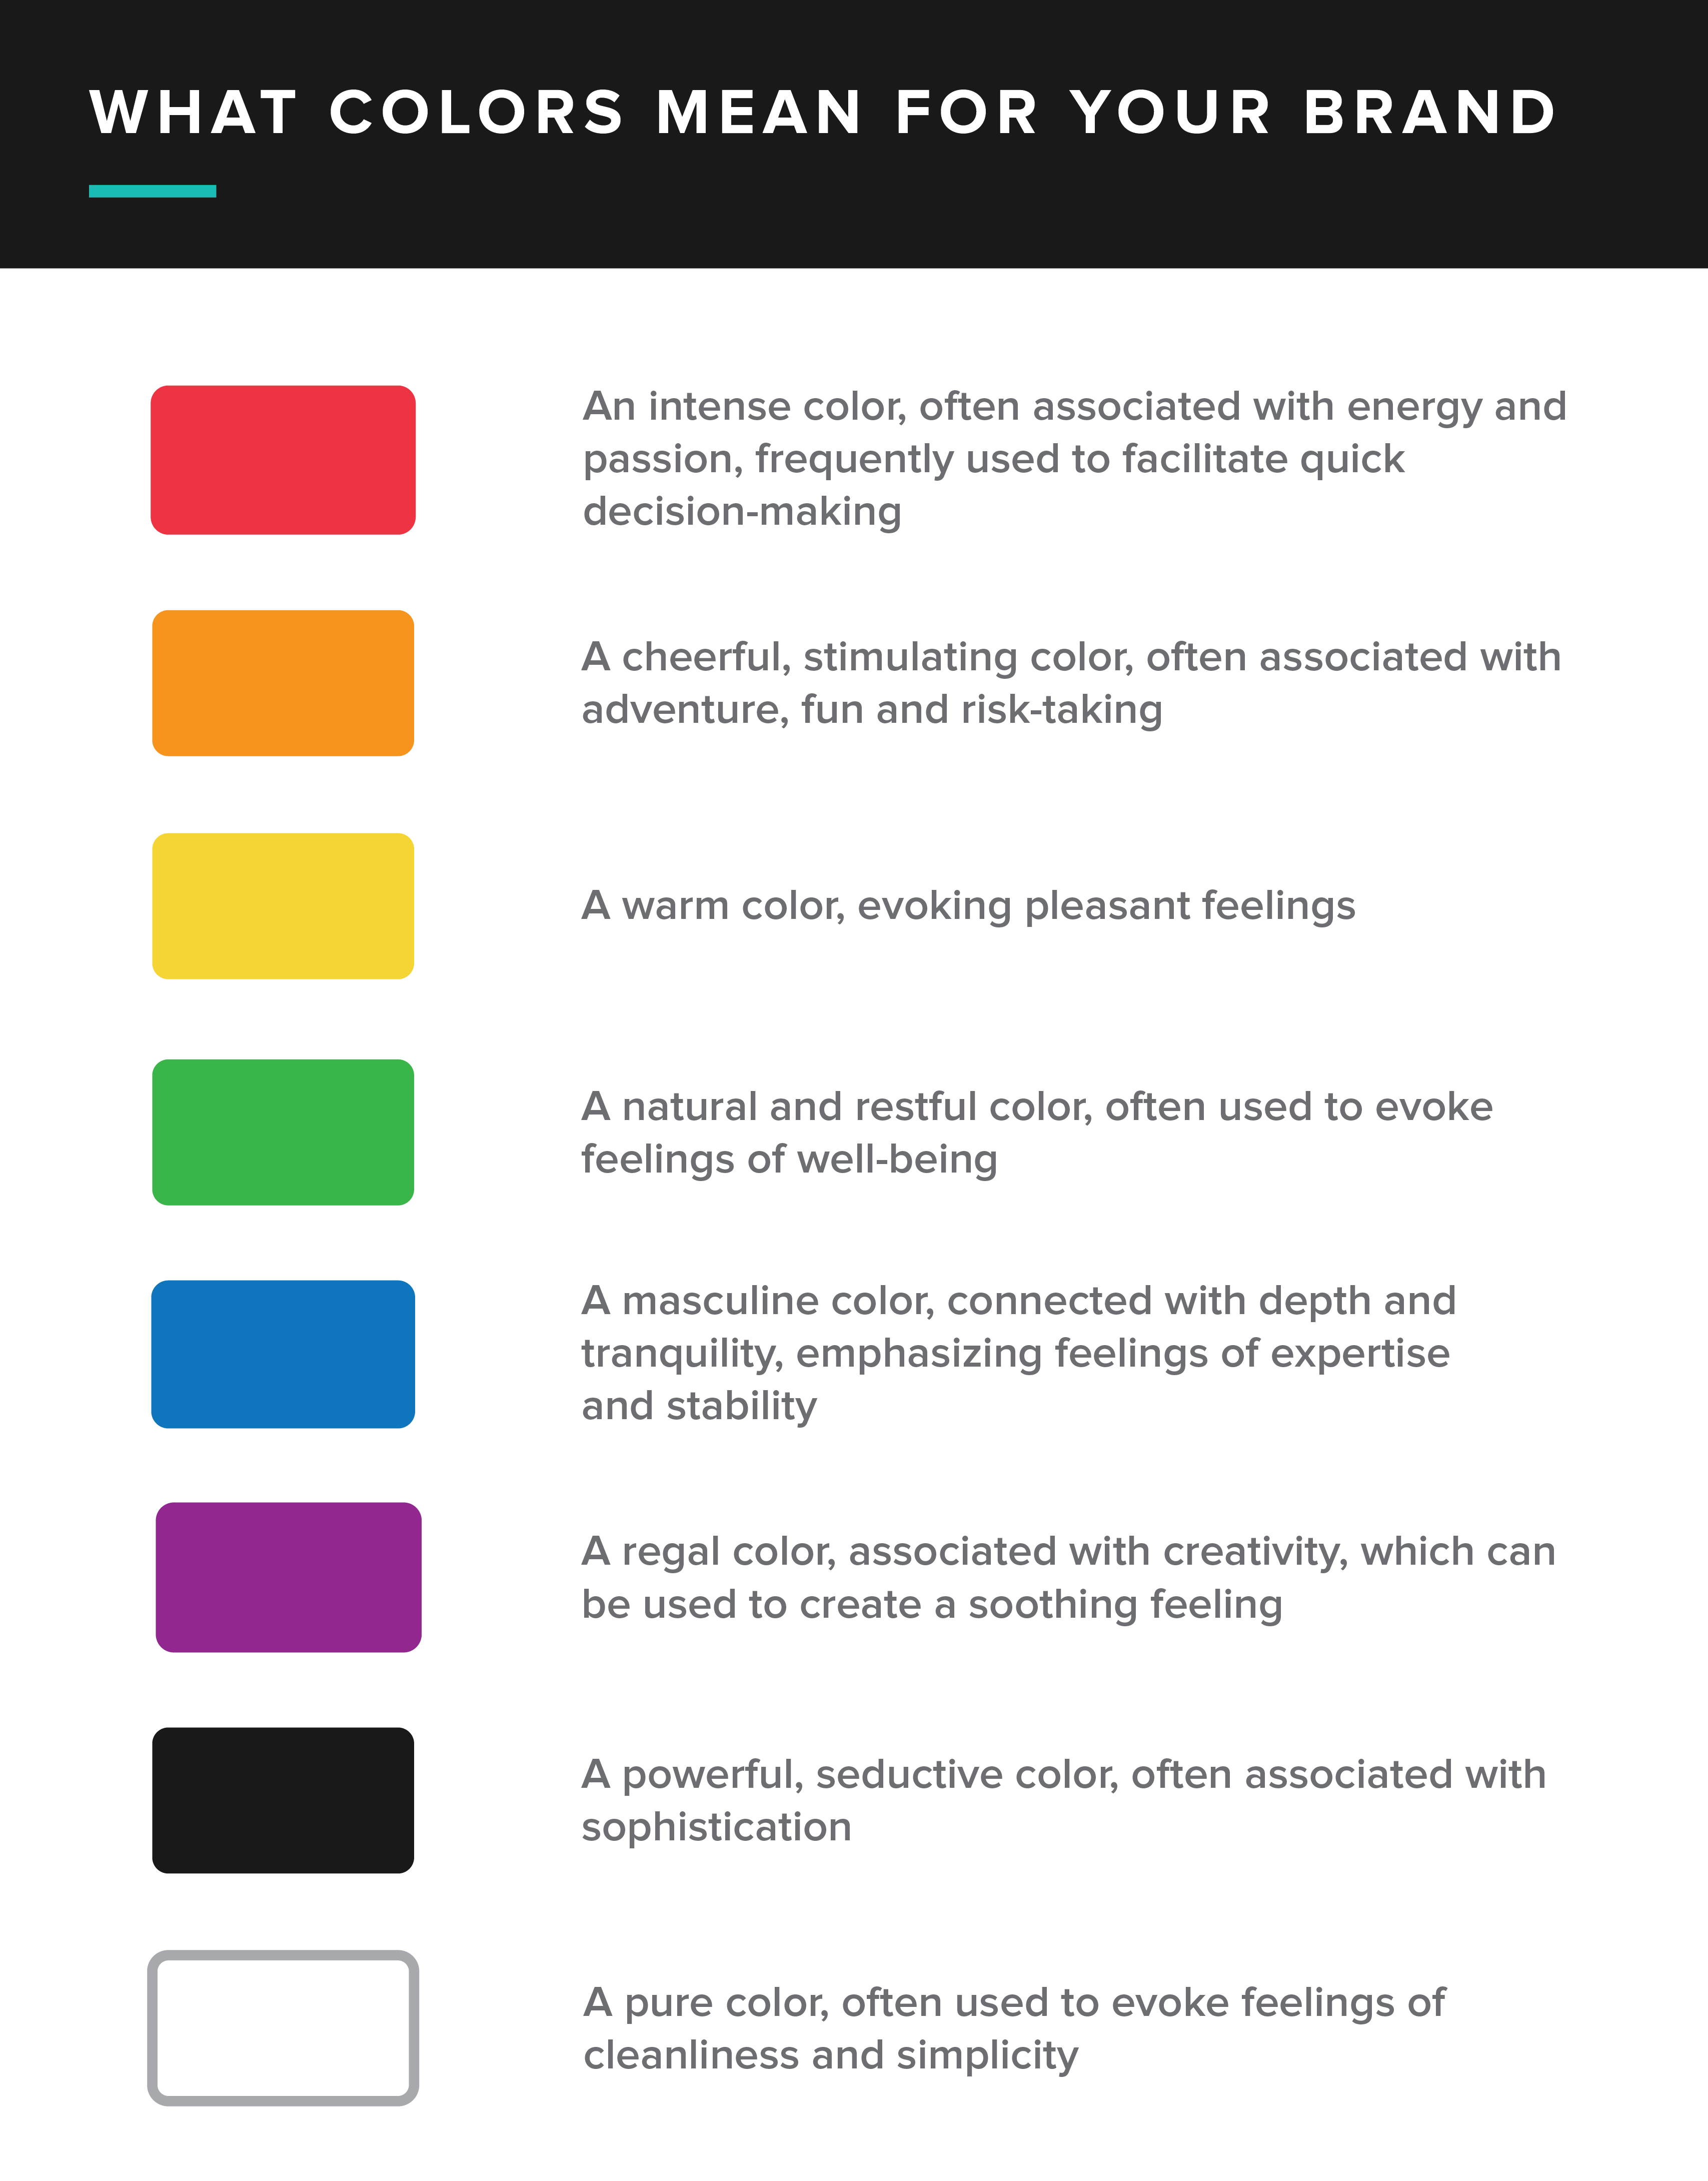 https://www.business2community.com/wp-content/uploads/2019/12/How-to-choose-colors-brand-identity-visual-identity.png